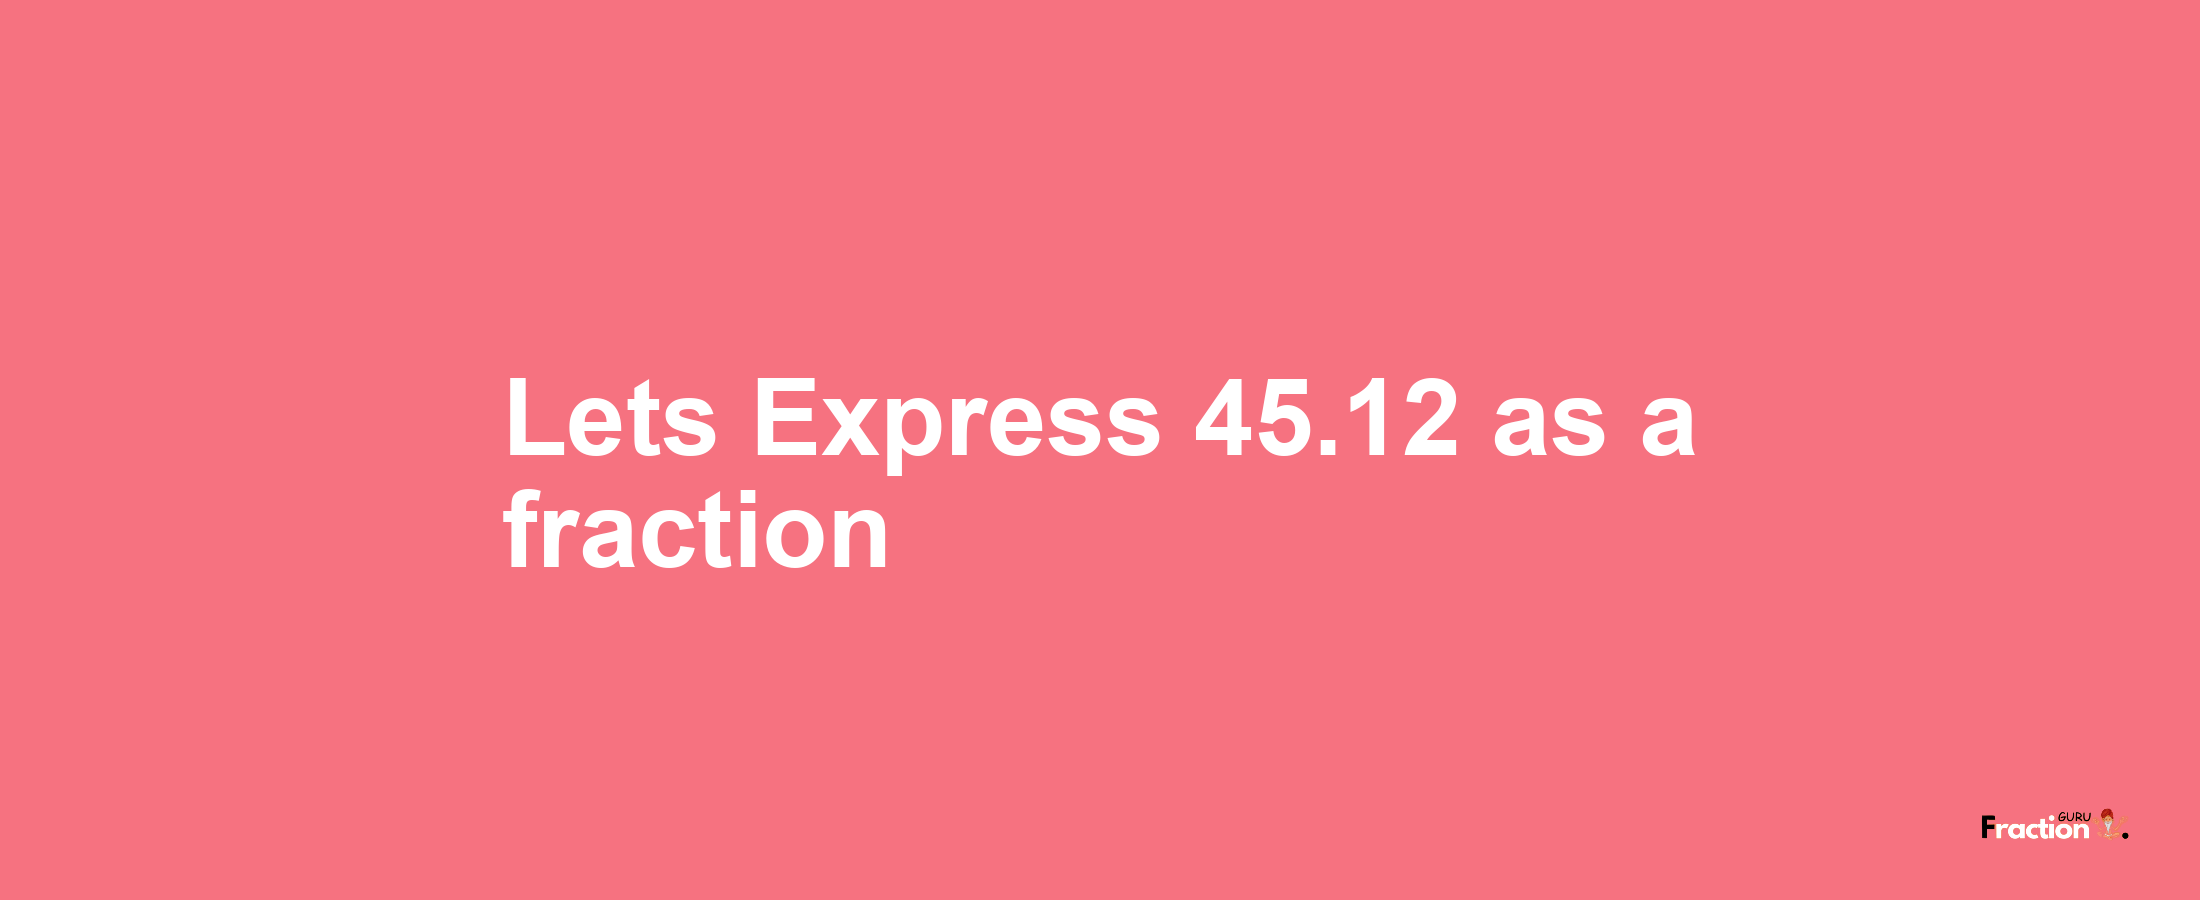 Lets Express 45.12 as afraction